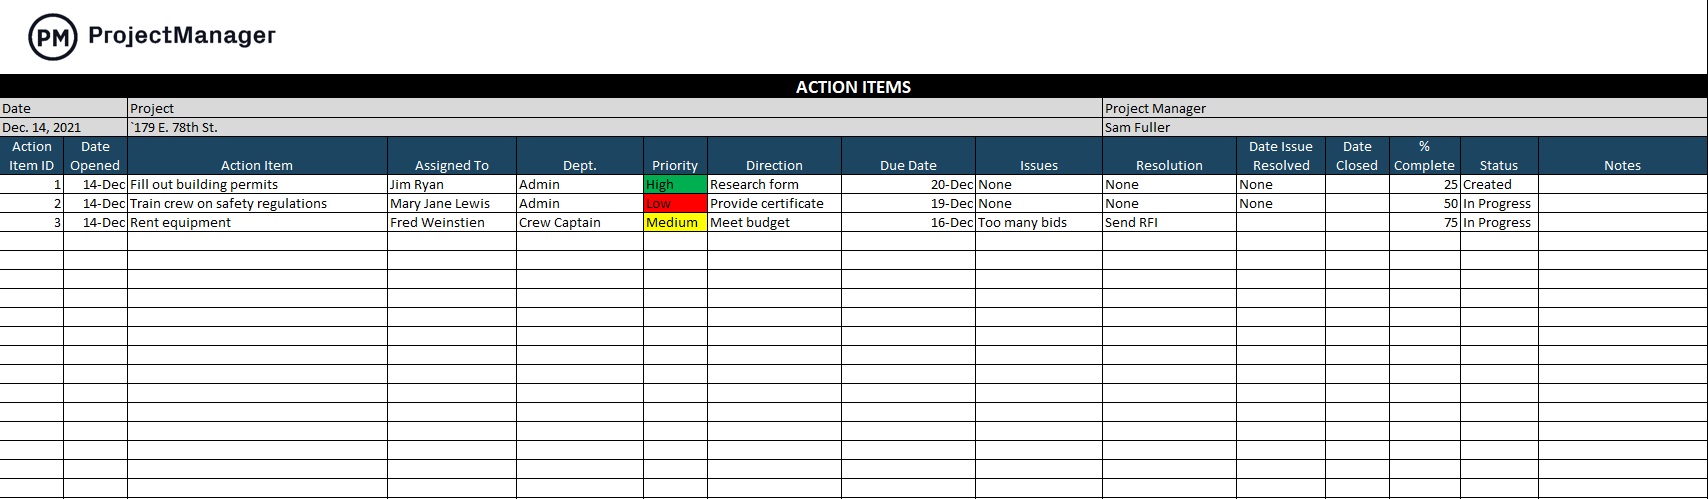 Free Action Items Template for Excel ProjectManager